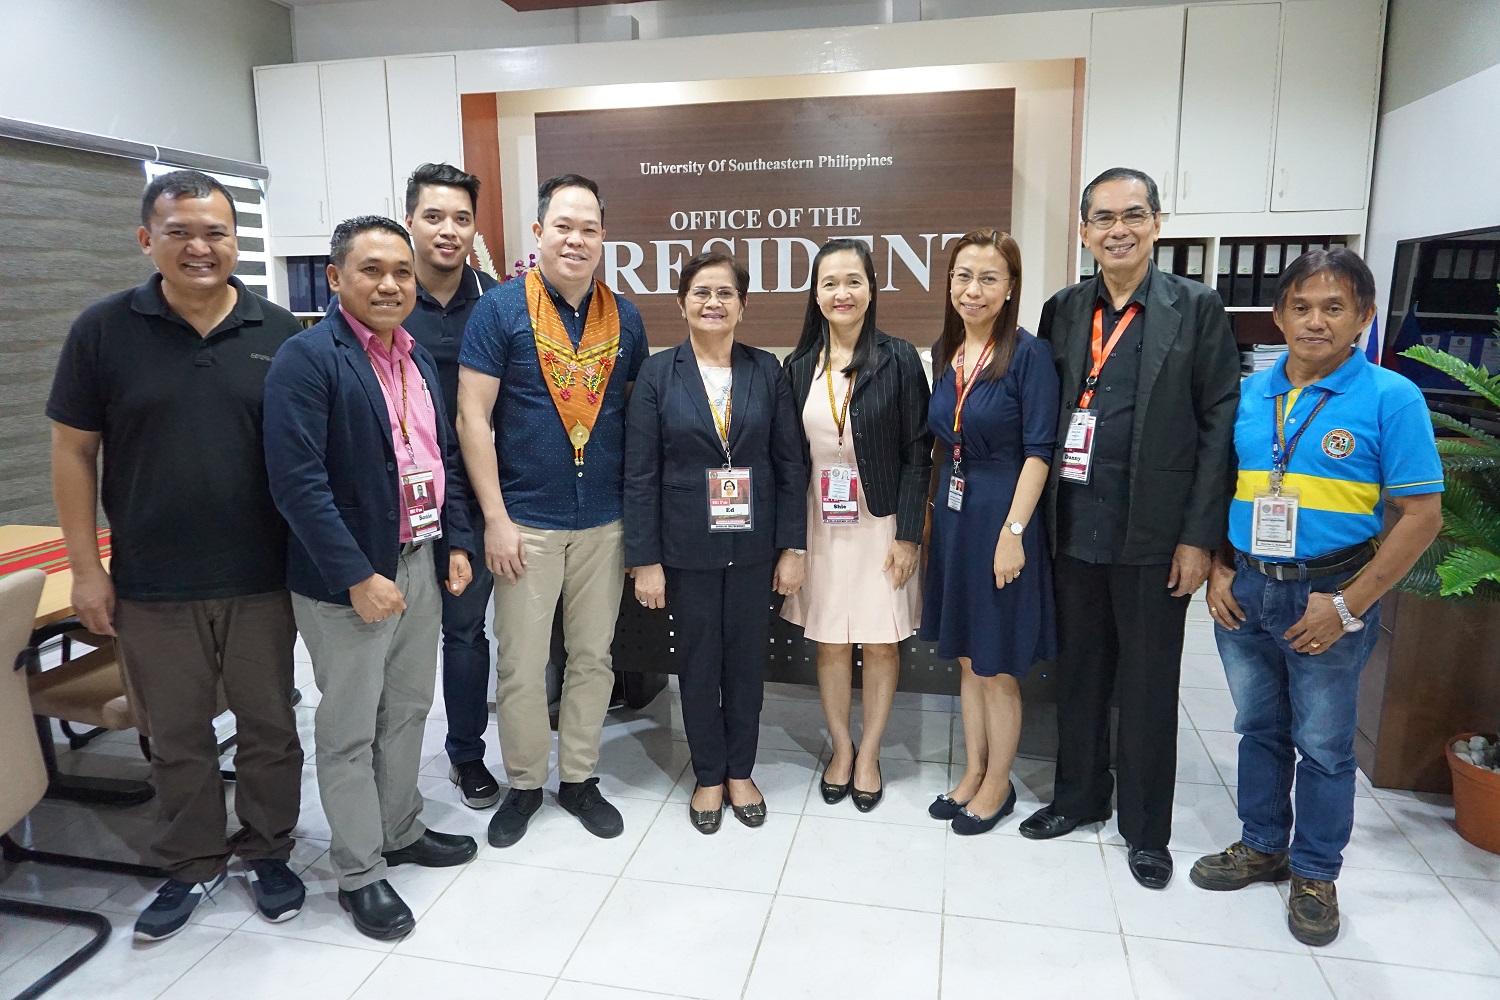 The University of Southeastern Philippines’ Top Management welcomed CHED Commissioner and USeP’s Board of Regents Chairperson, Dr. Aldrin A. Darilag at the Office of the President Boardroom, USeP Obrero Campus